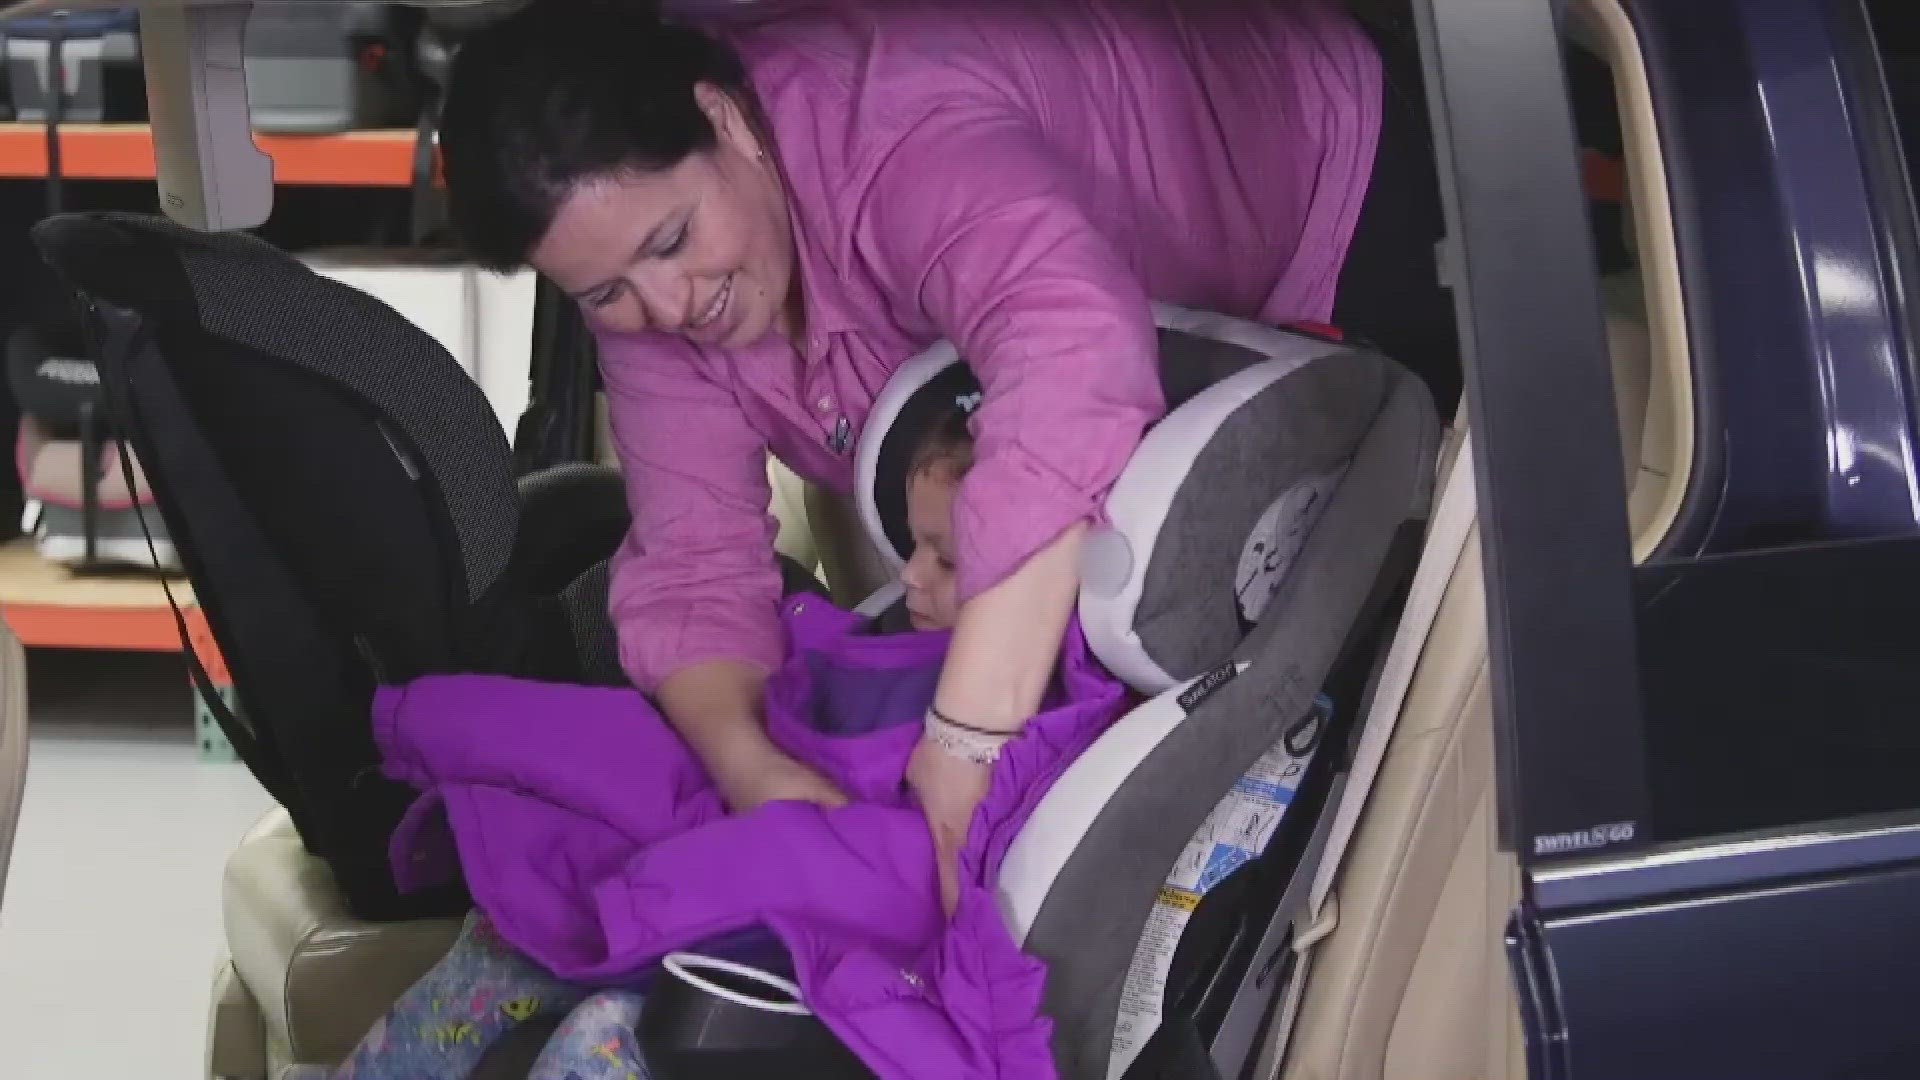 Car seat safety: Should you remove your child's winter jacket